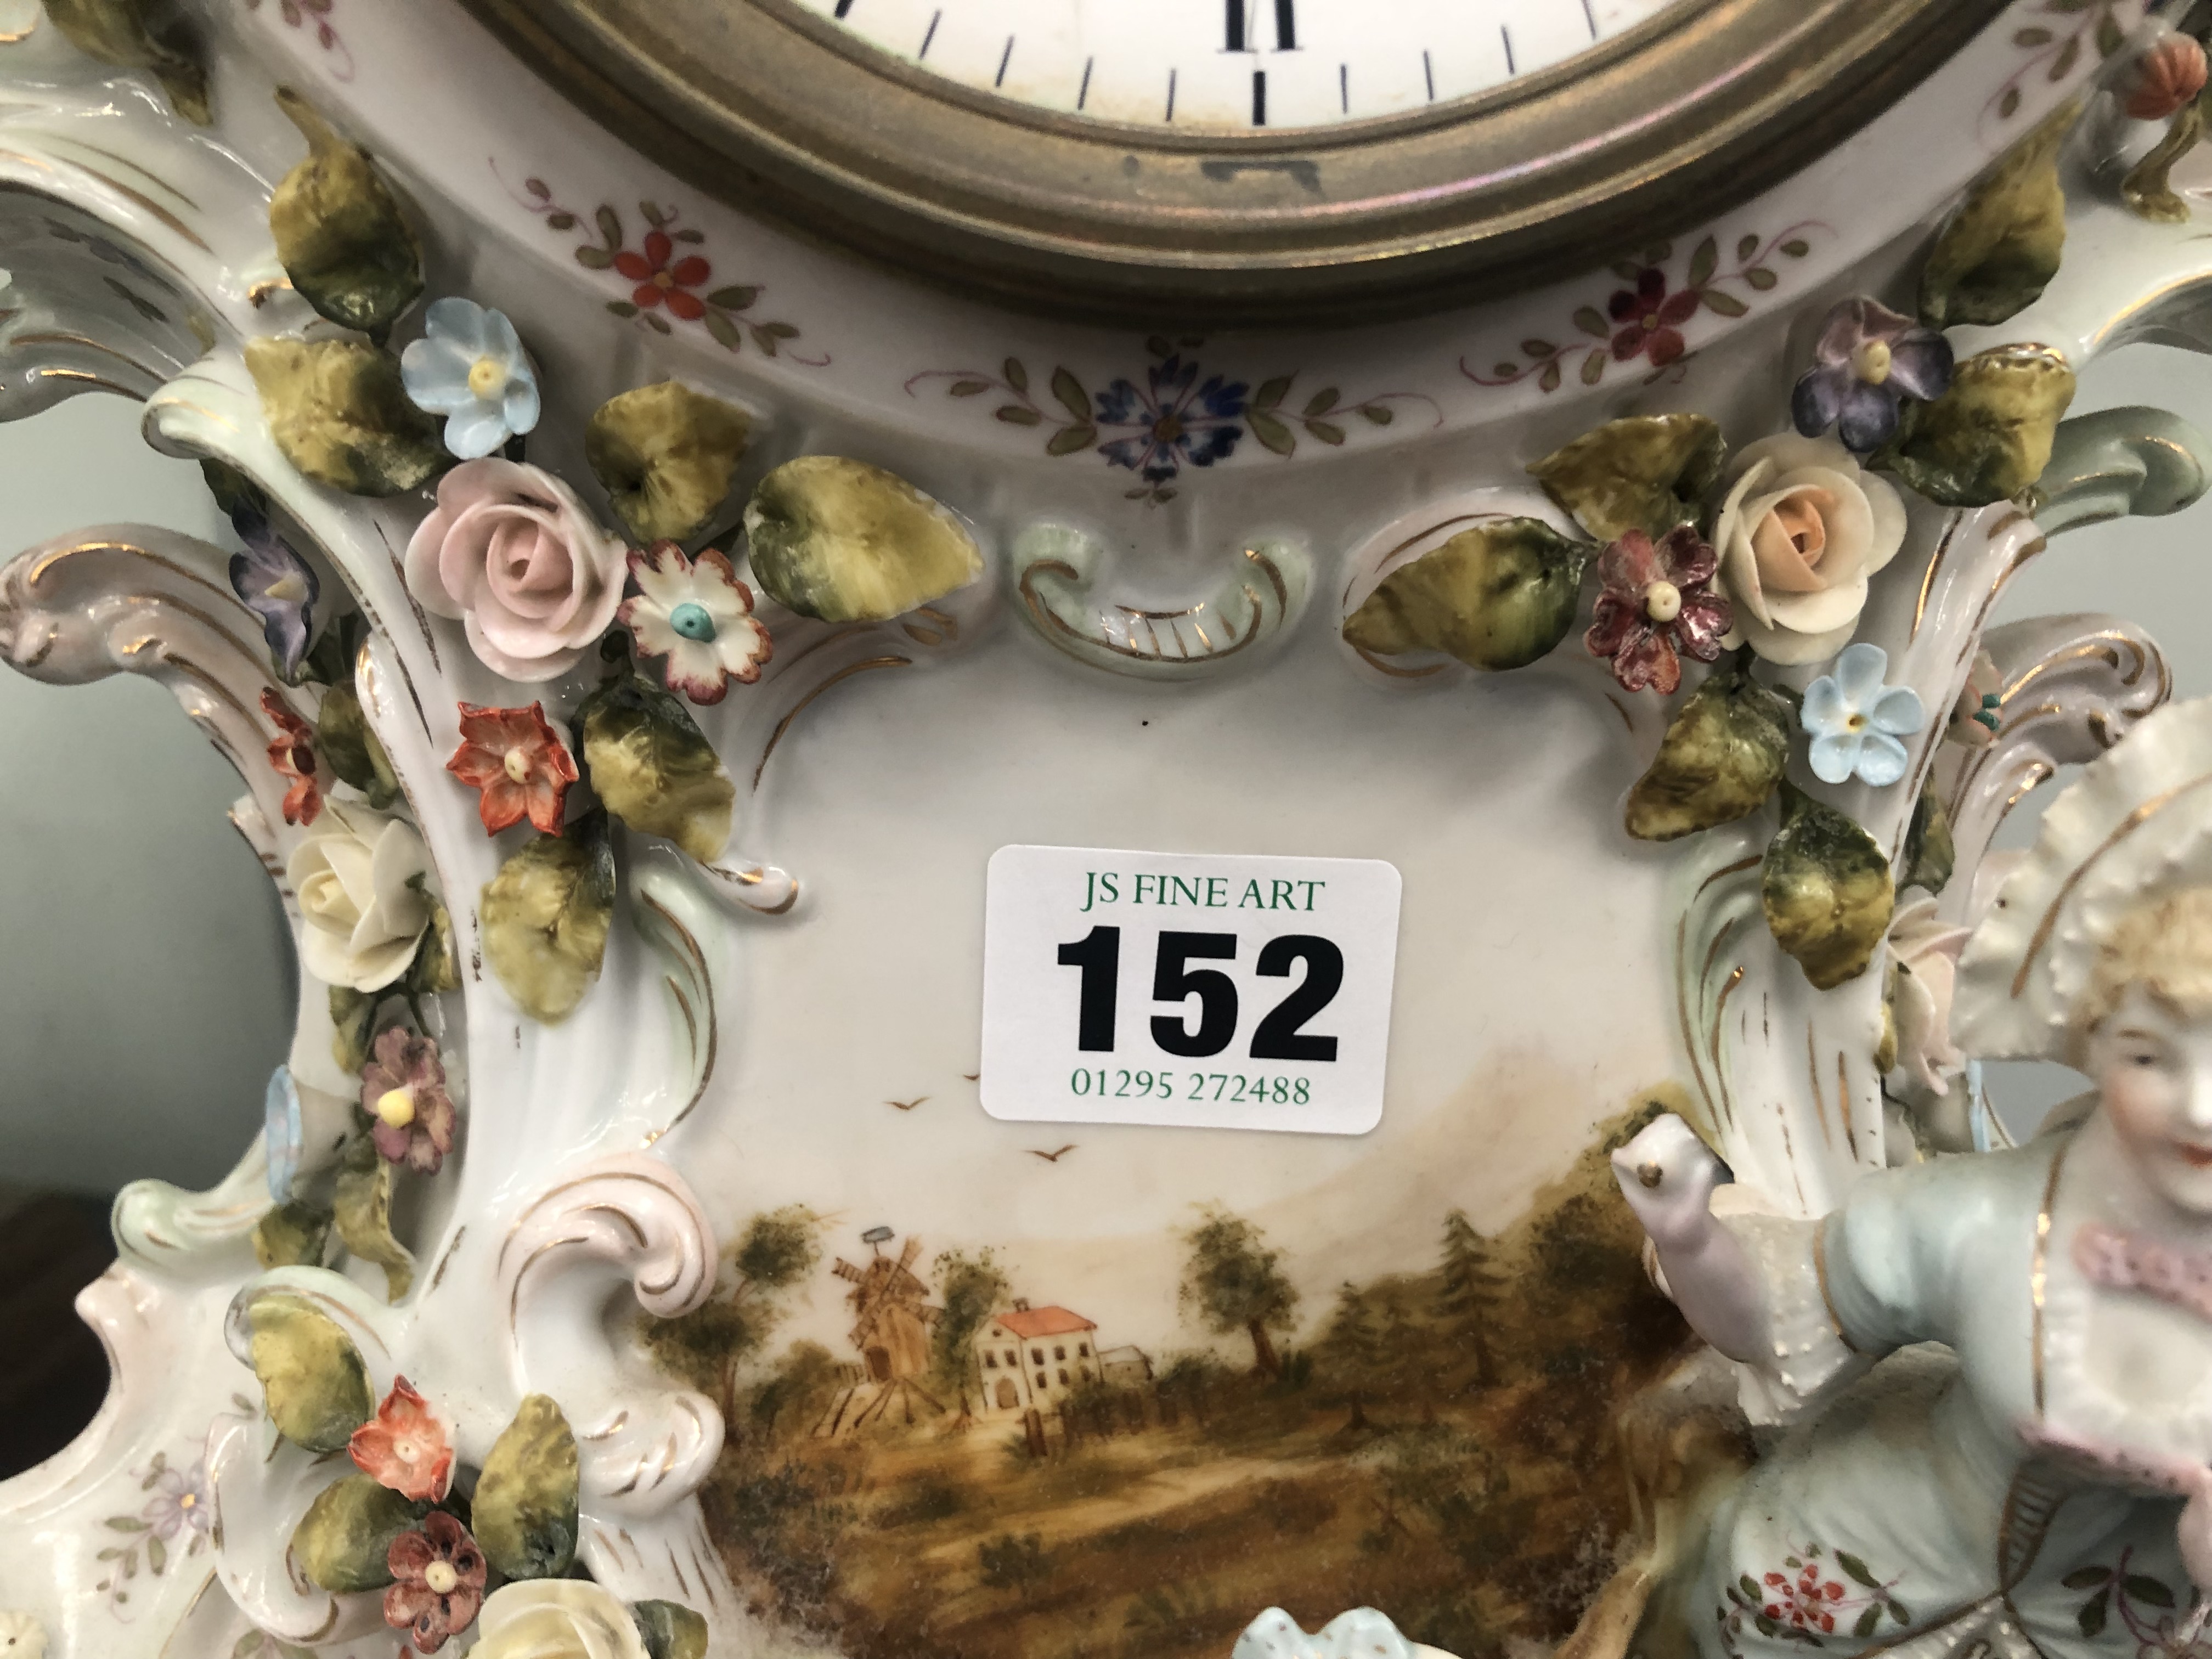 A BREGUET MARKED DIAL TO A CLOCK STRIKING ON A BELL IN A FLOWER ENCRUSTED PORCELAIN CASE - Image 2 of 10